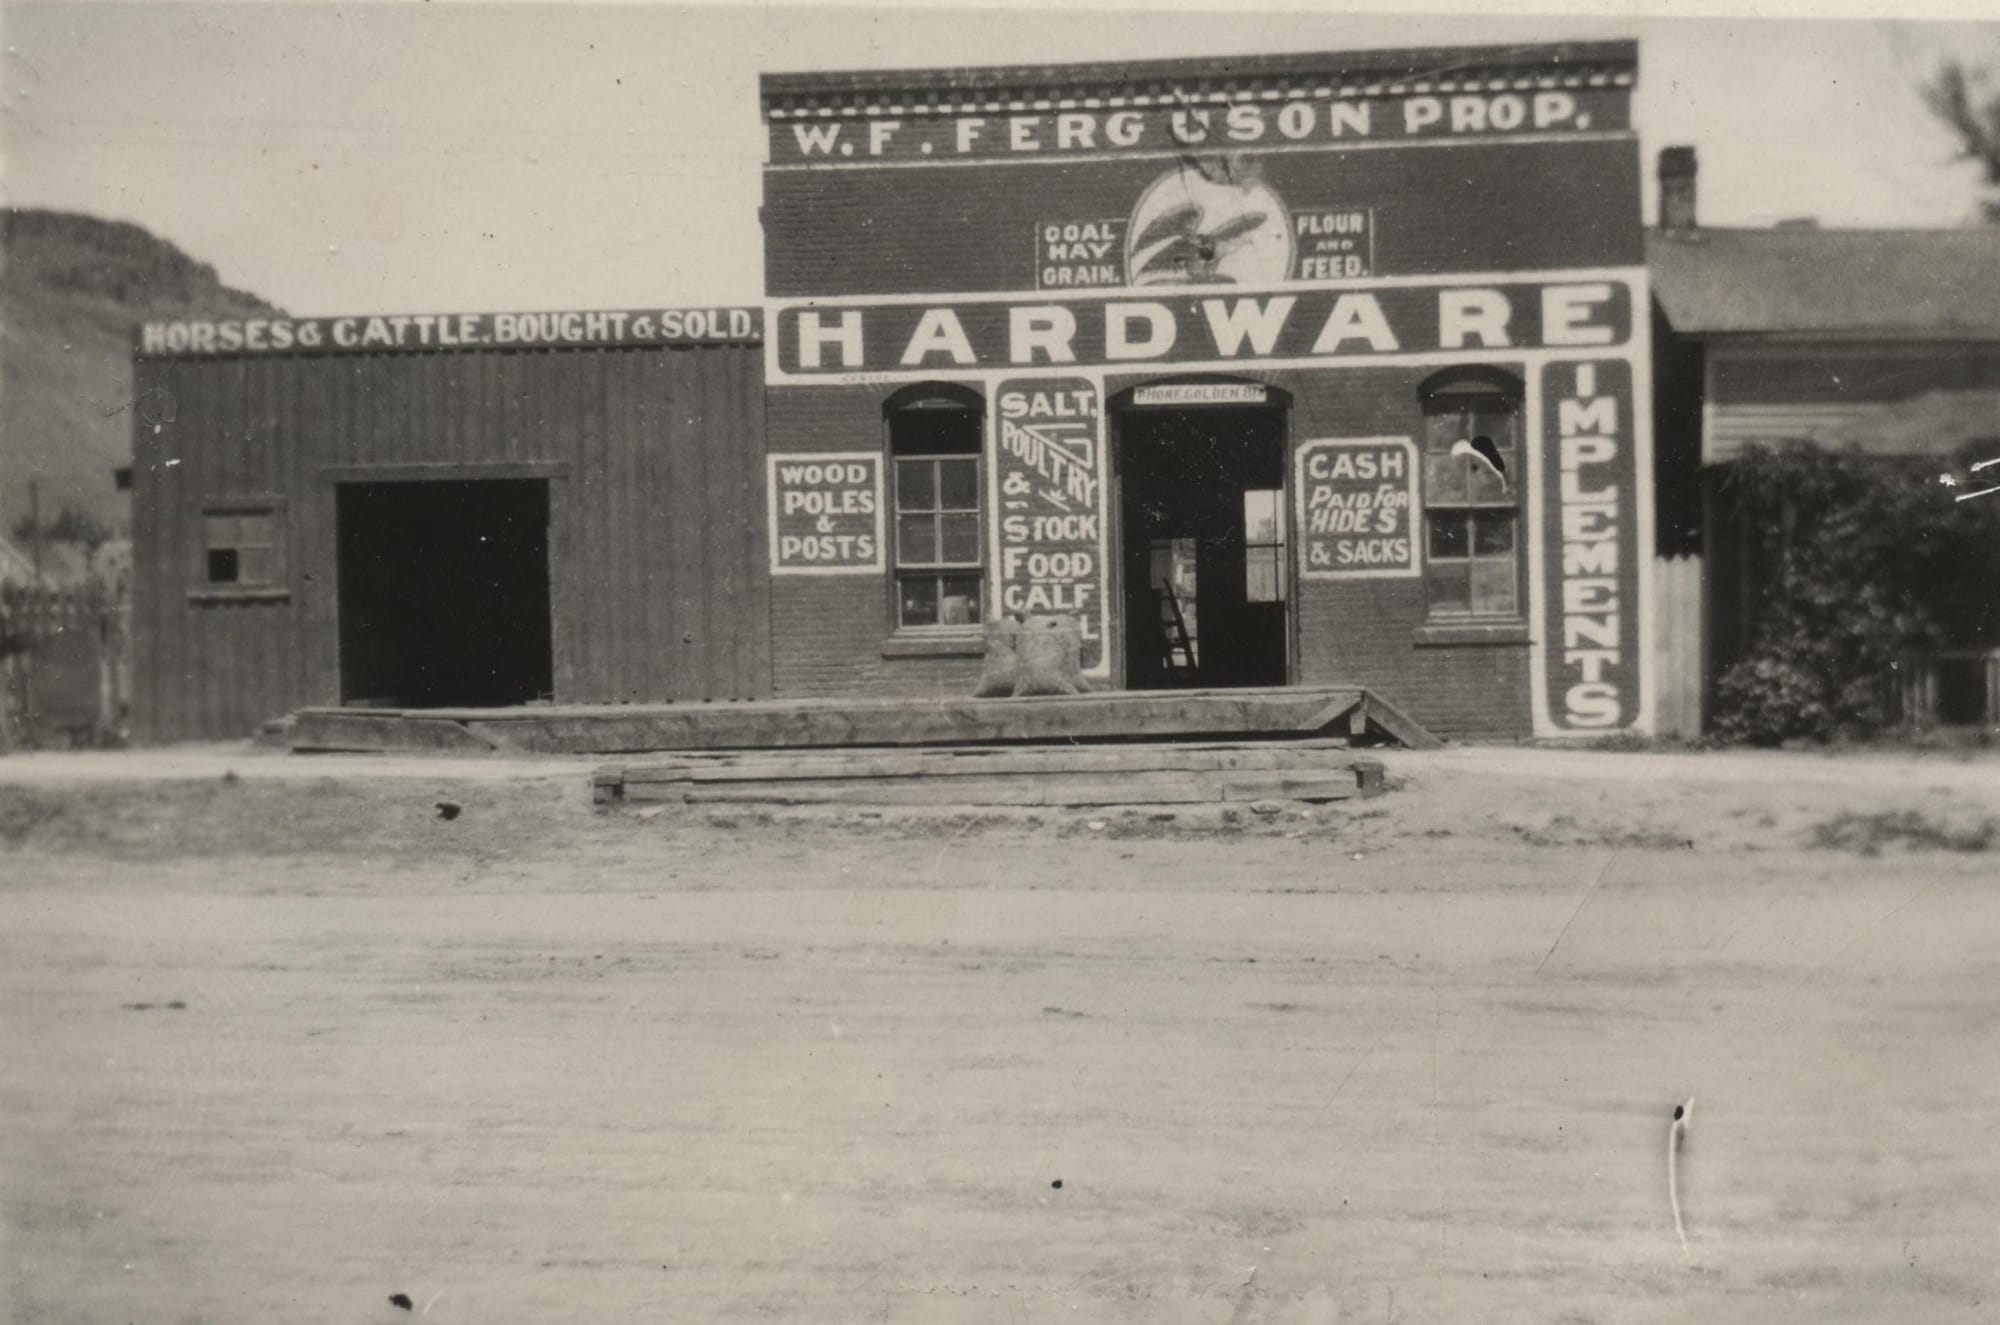 Wooden store building with large sign saying HARDWARE, smaller signs for horse & cattle bought & sold, coal, hay, grain